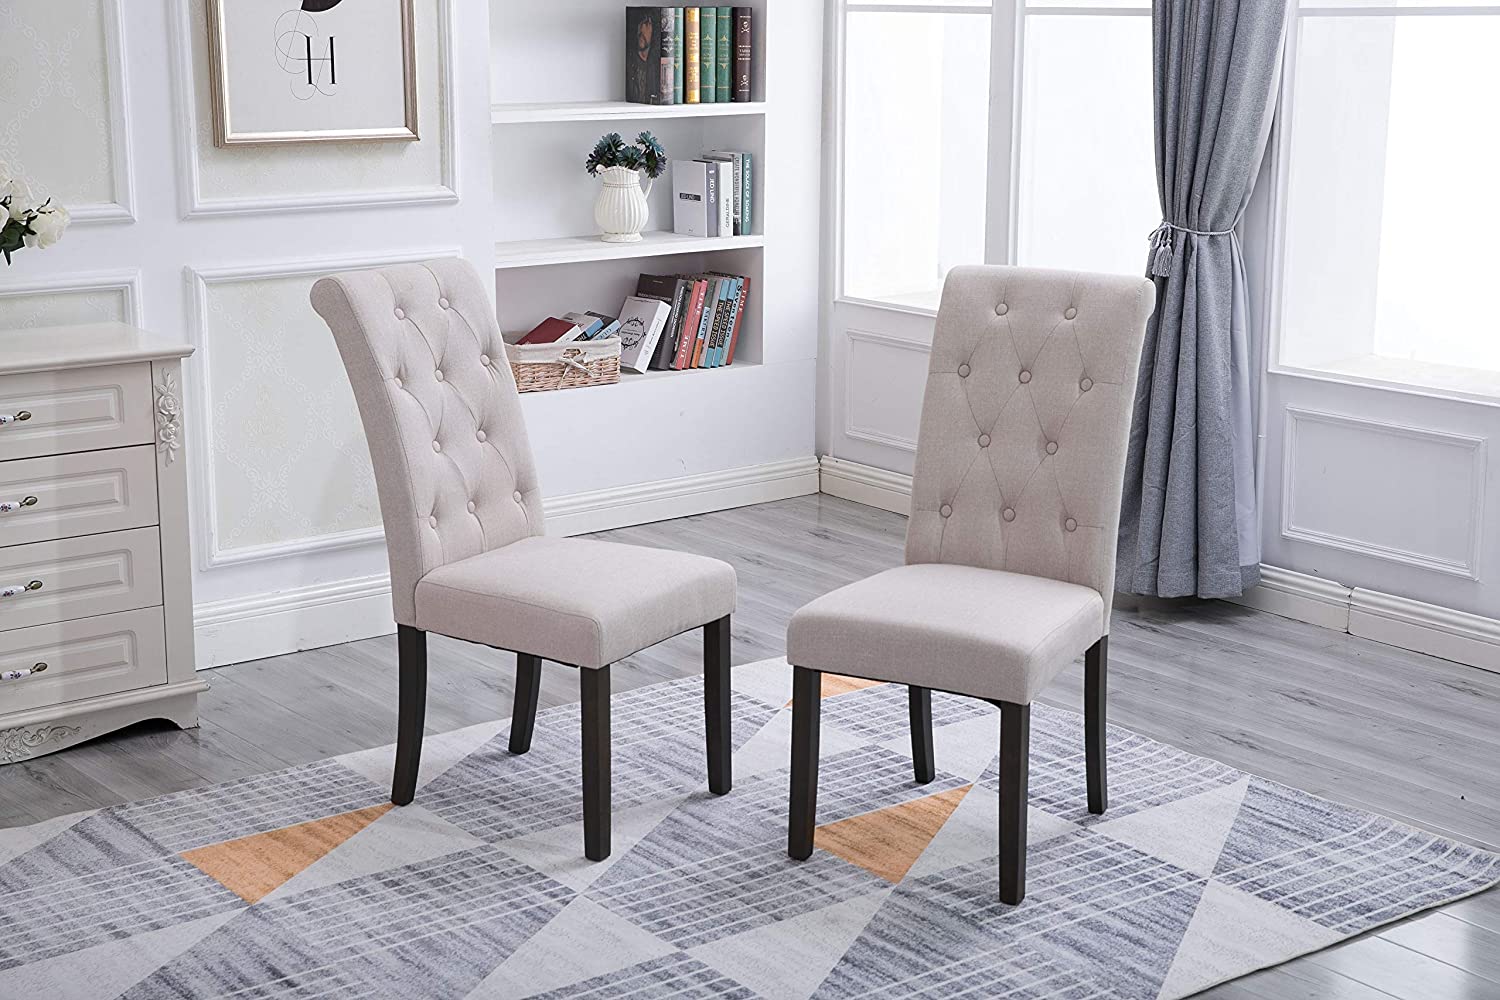 B08K4561VB Dinning Room Chair Set of 2 Upholstery Fabric Kitchen Chairs Elegant Solid Wood Tufted Dining Room Set with Solid Wood Legs